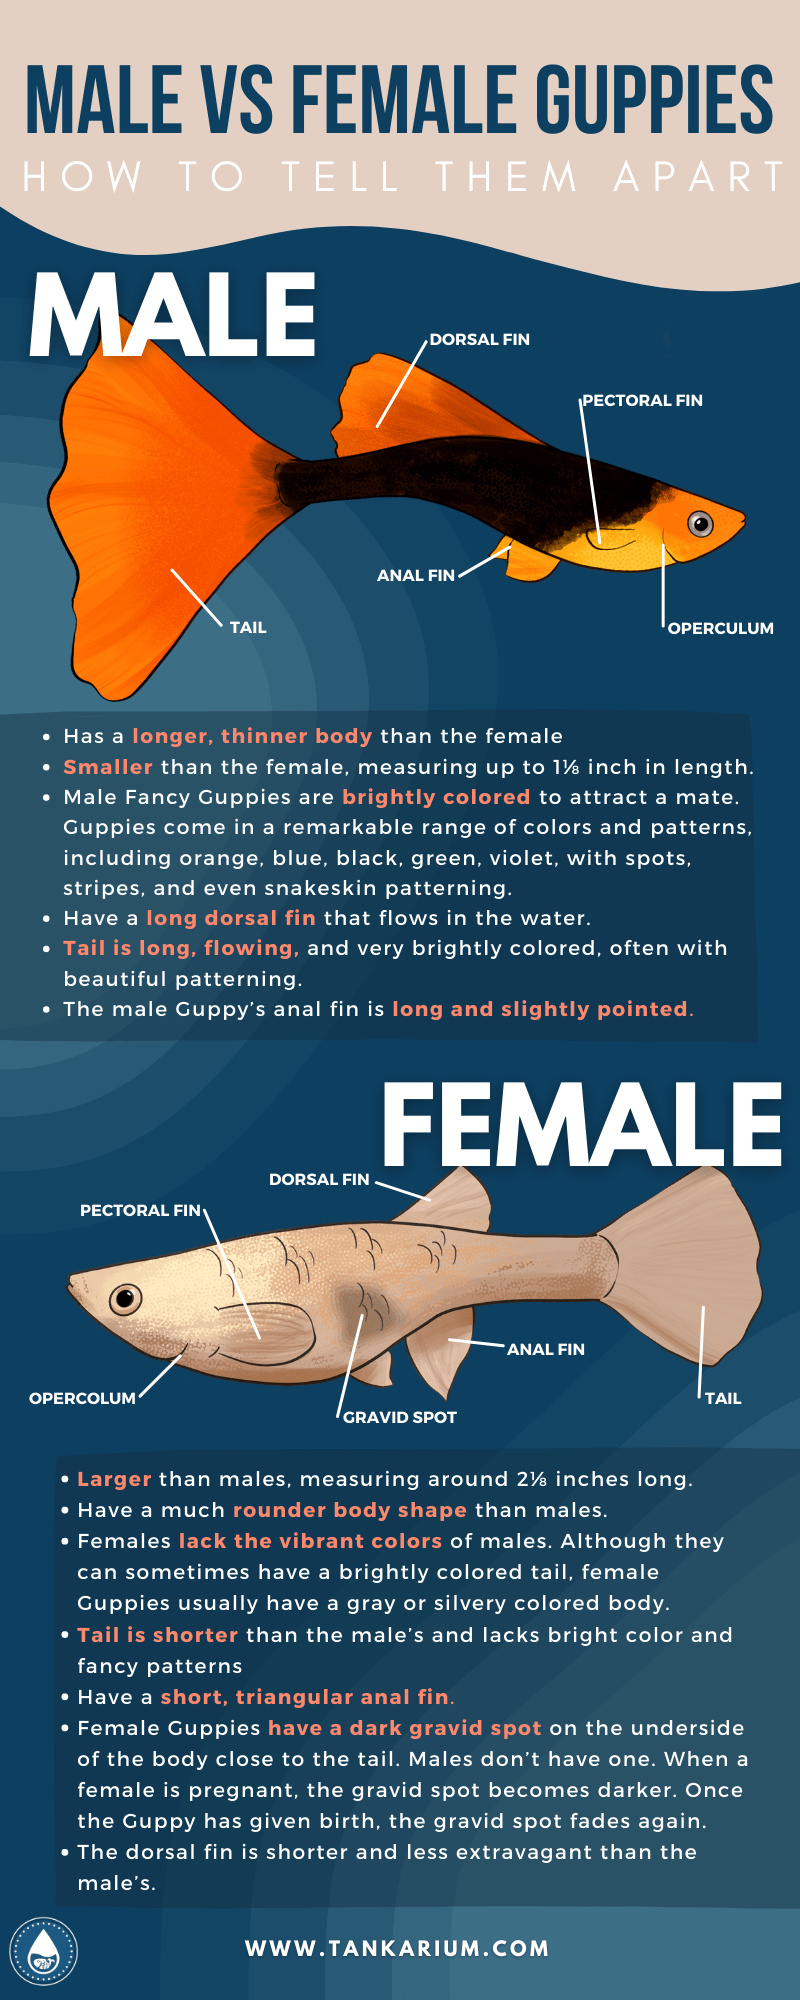 Nam Vs. Female Guppies: How to Tell Them Different - infograhics